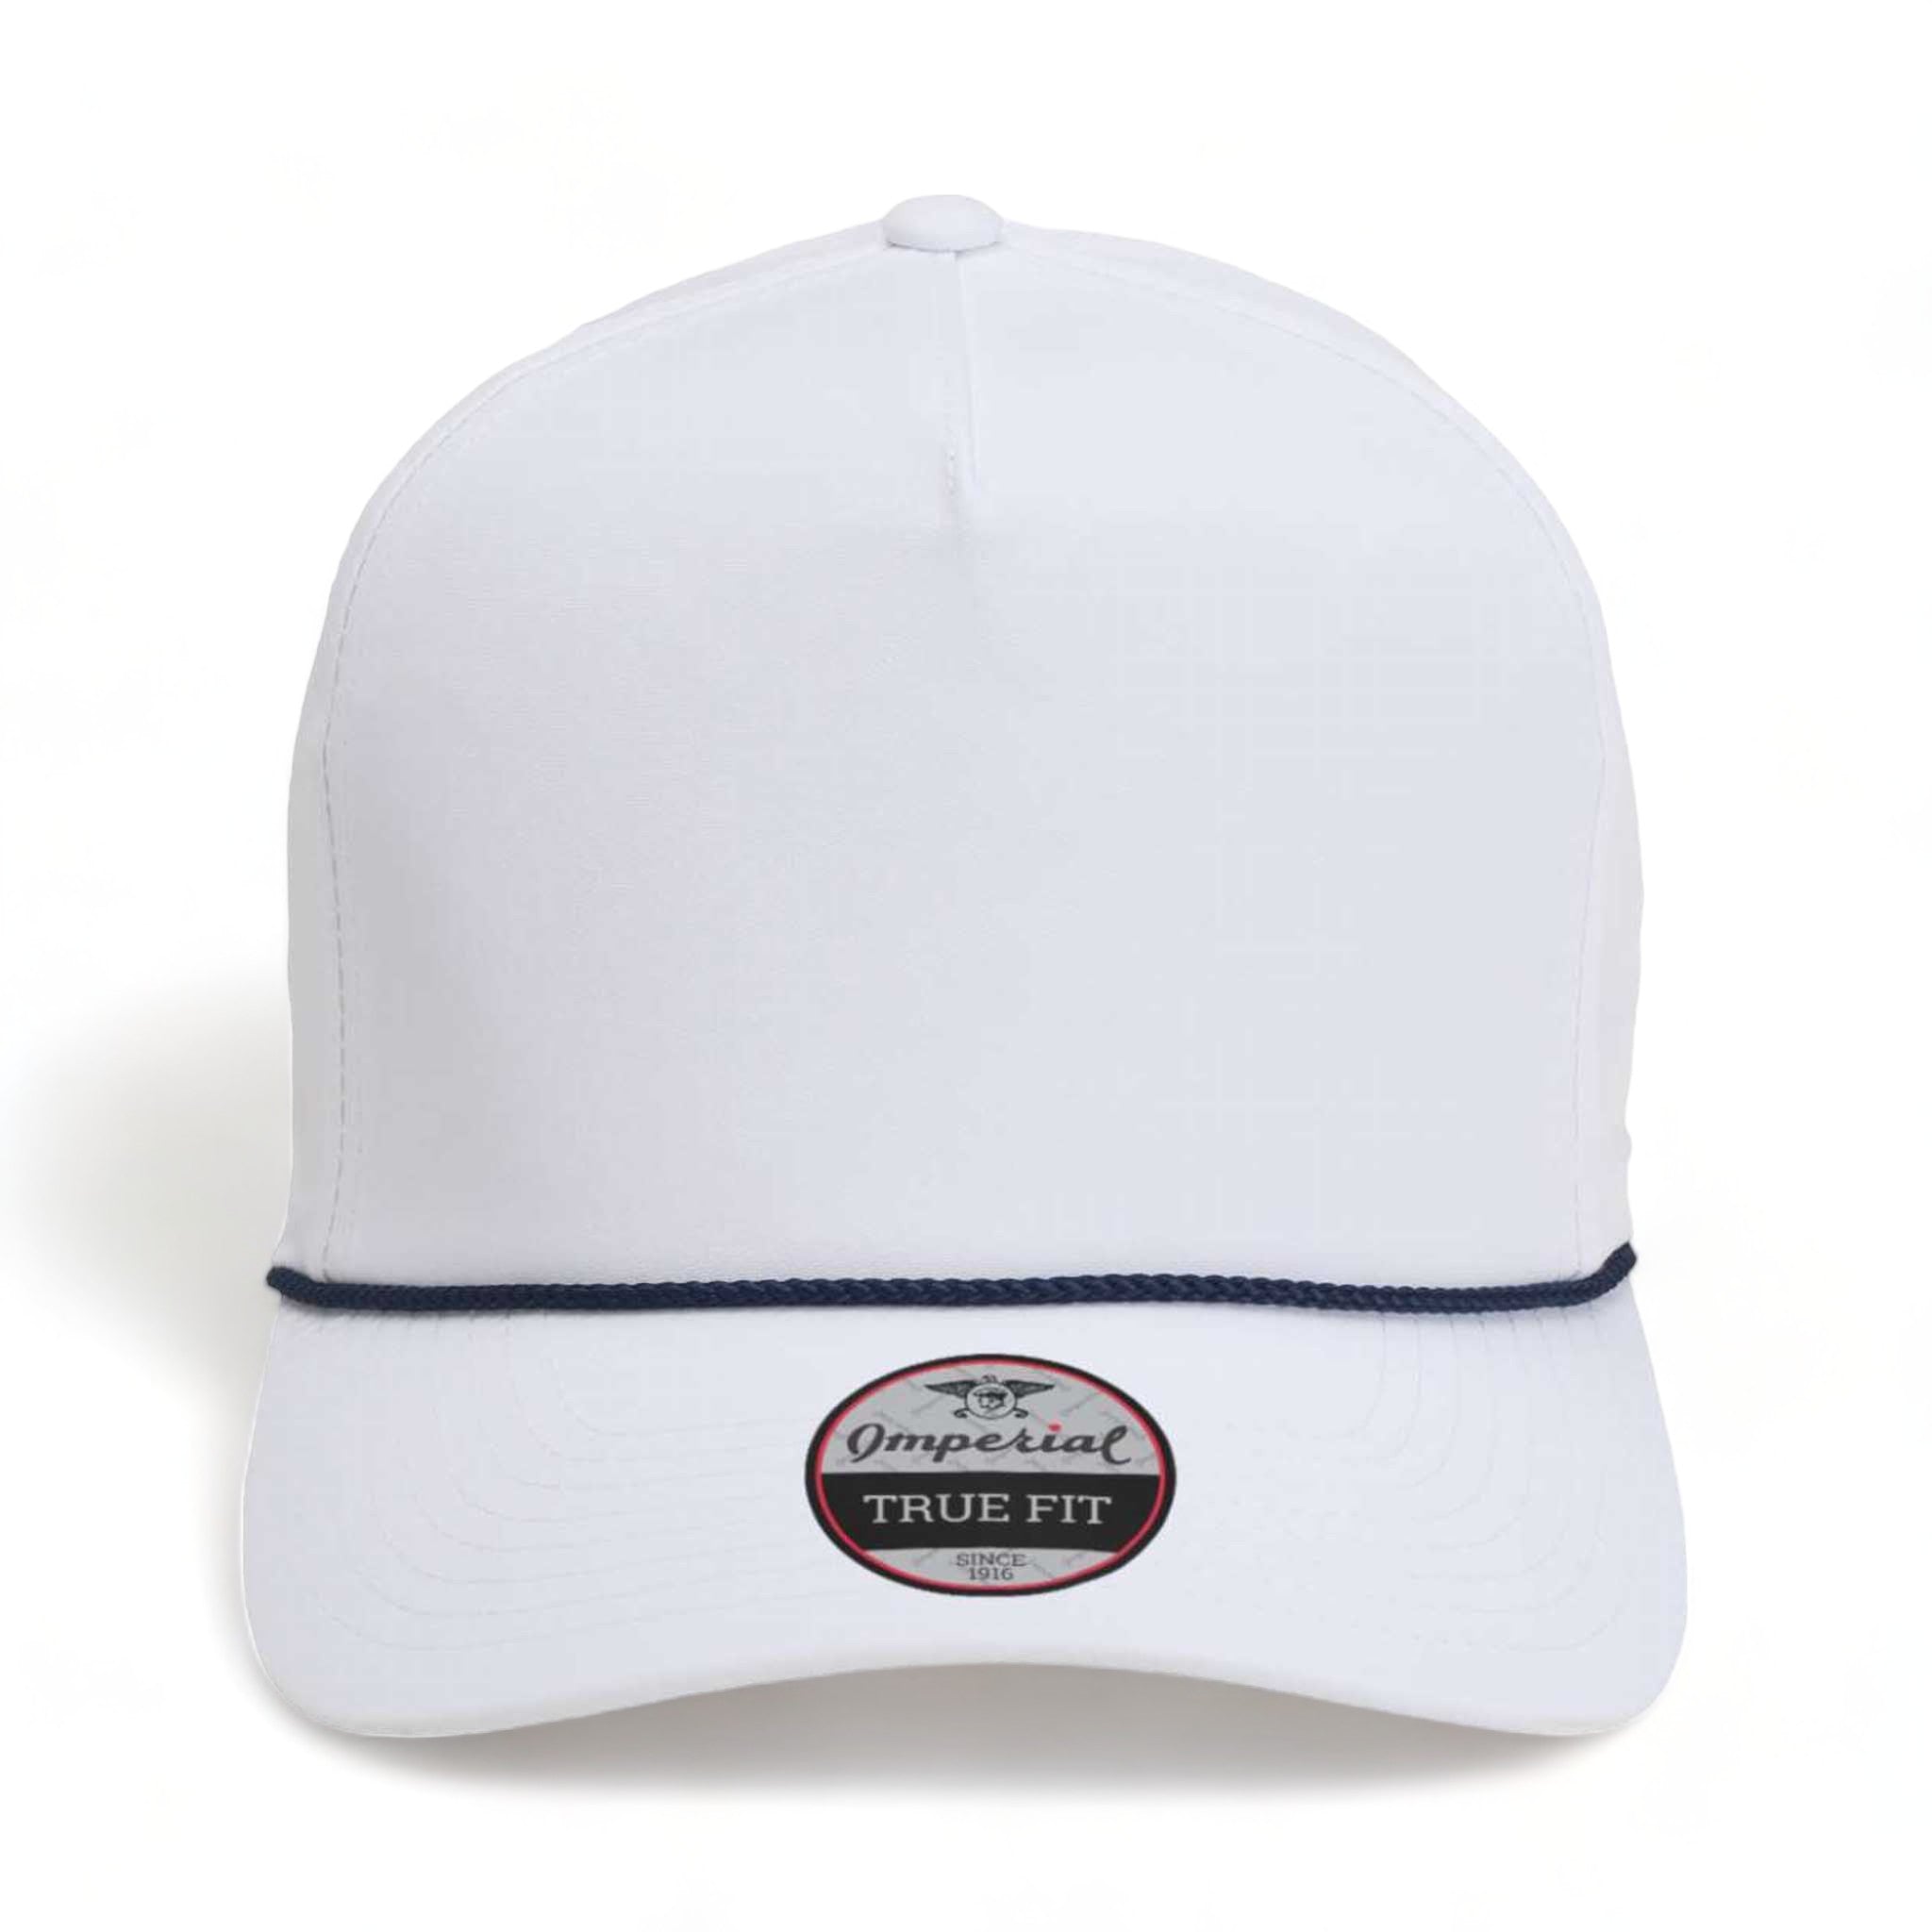 Front view of Imperial 5054 custom hat in white and navy